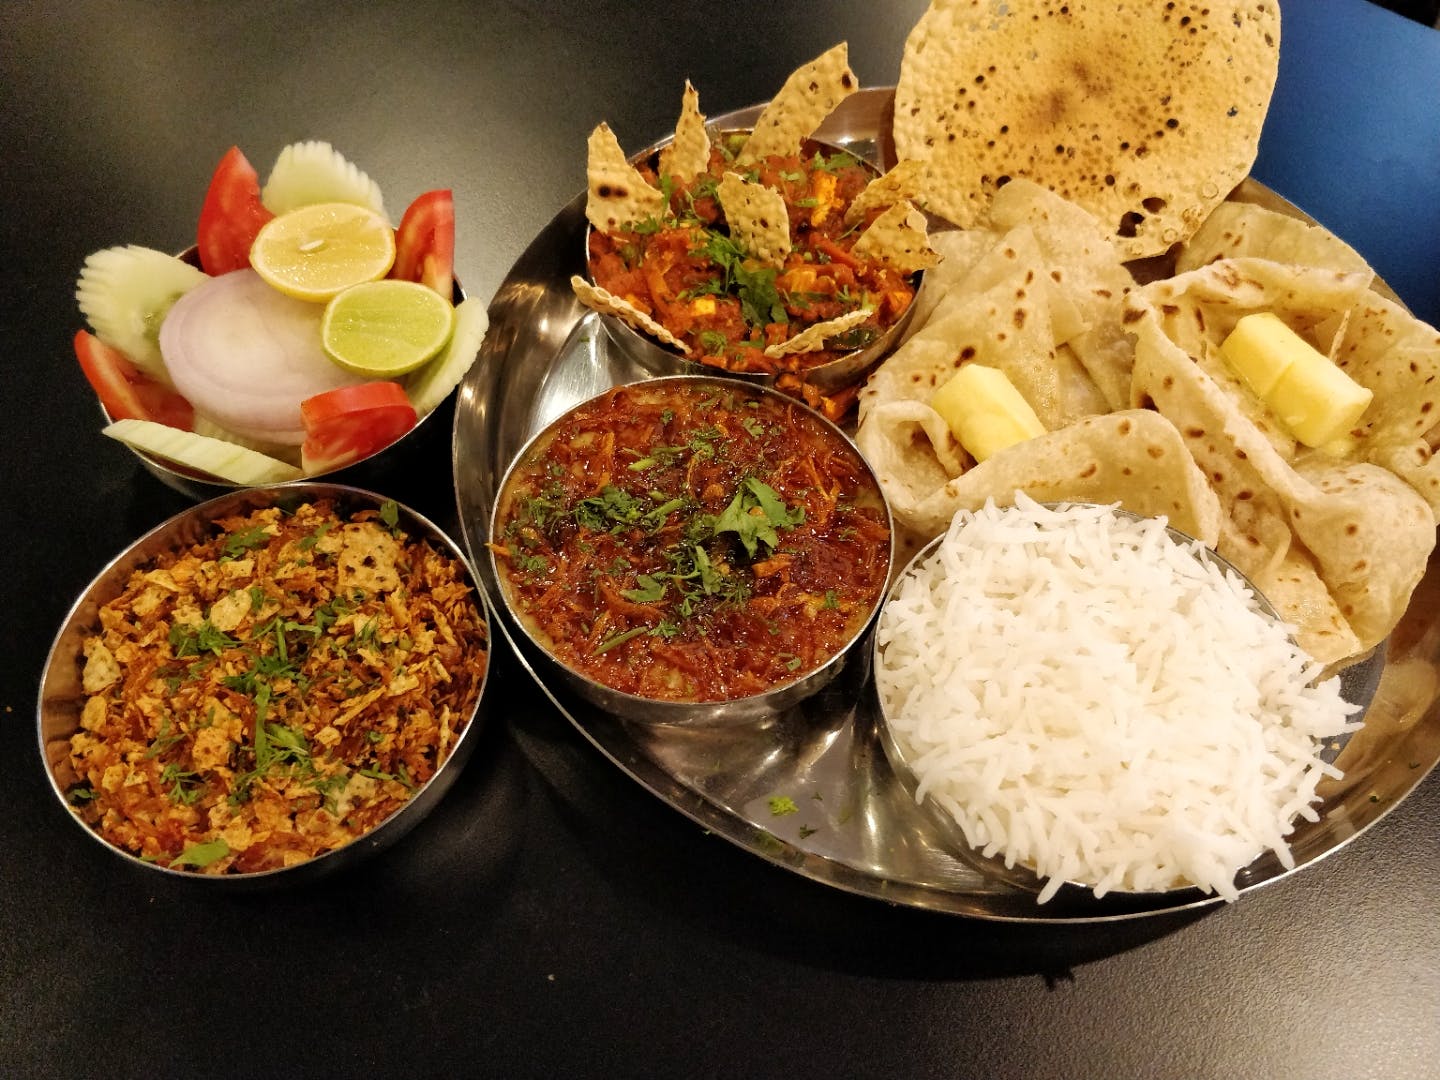 Dish,Food,Cuisine,Ingredient,Meal,Produce,Curry,Staple food,Indian cuisine,Lunch